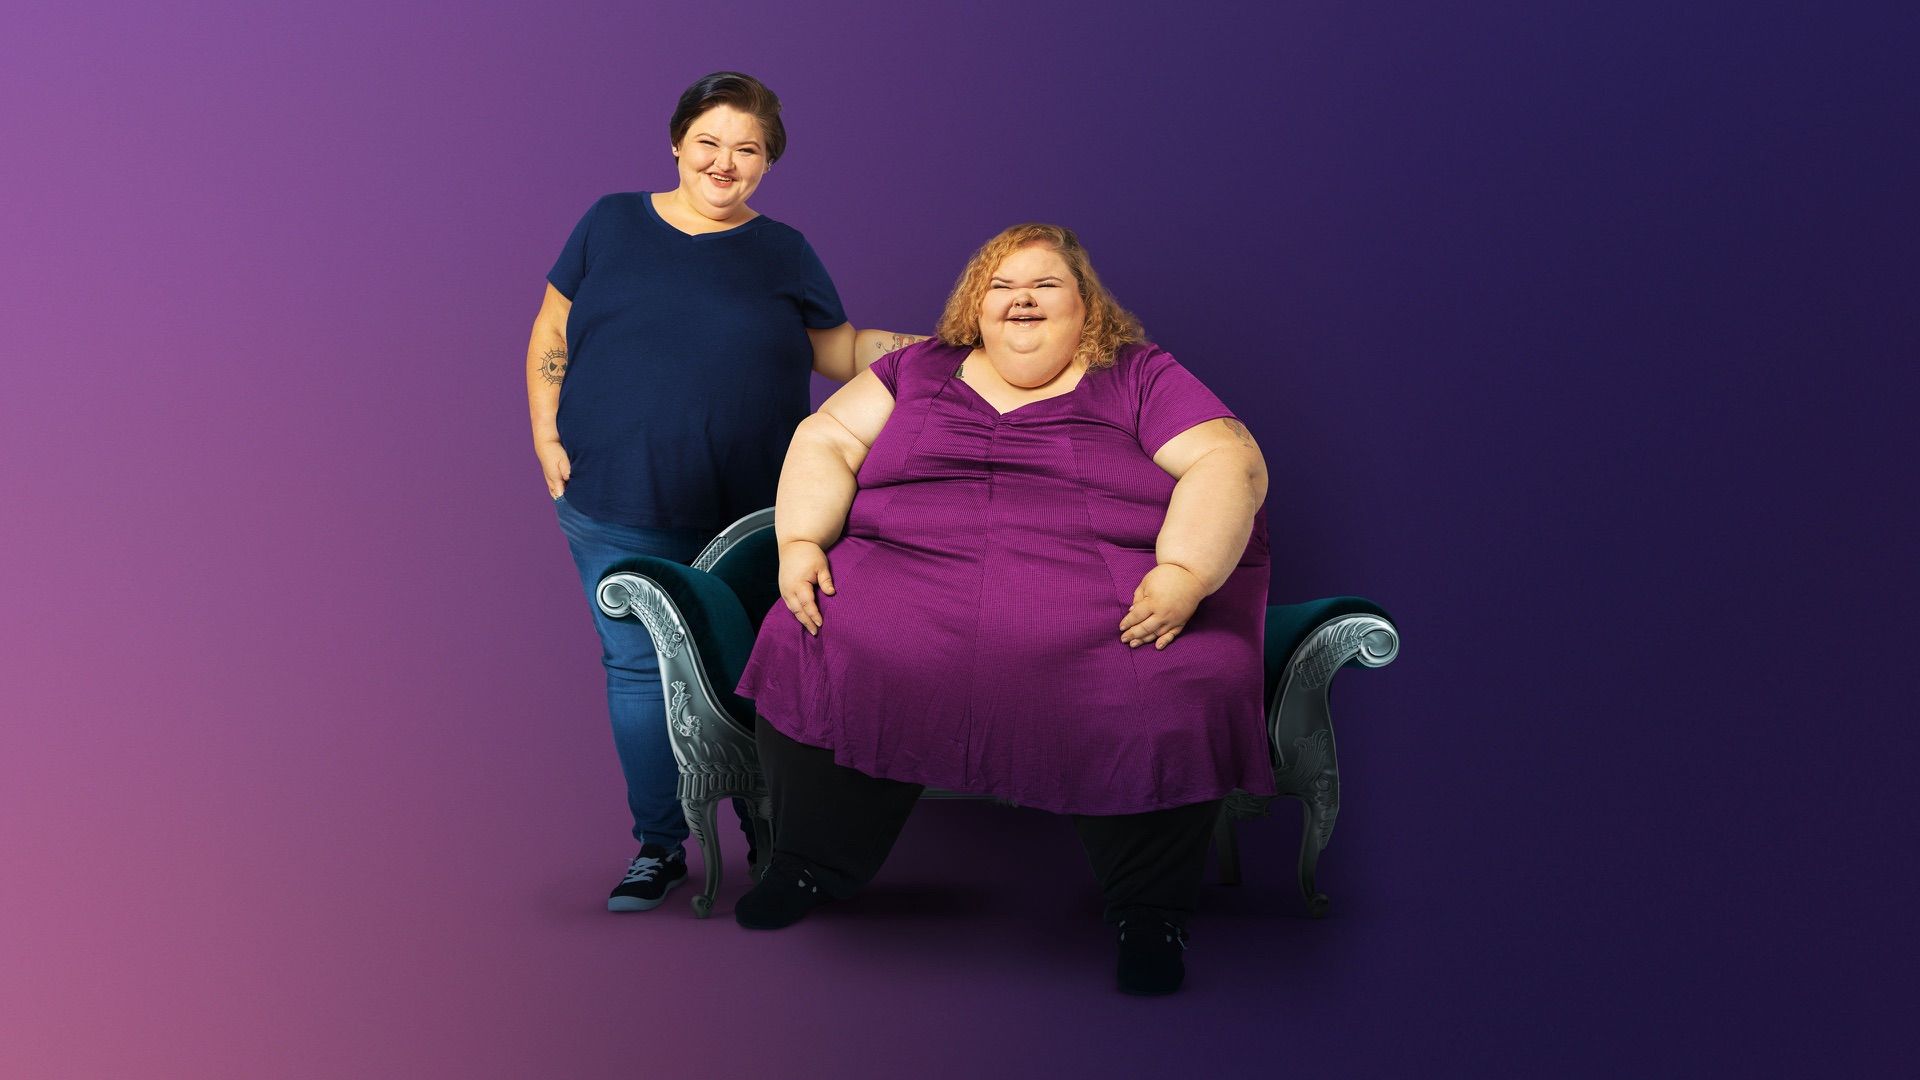 1000-lb Sisters background